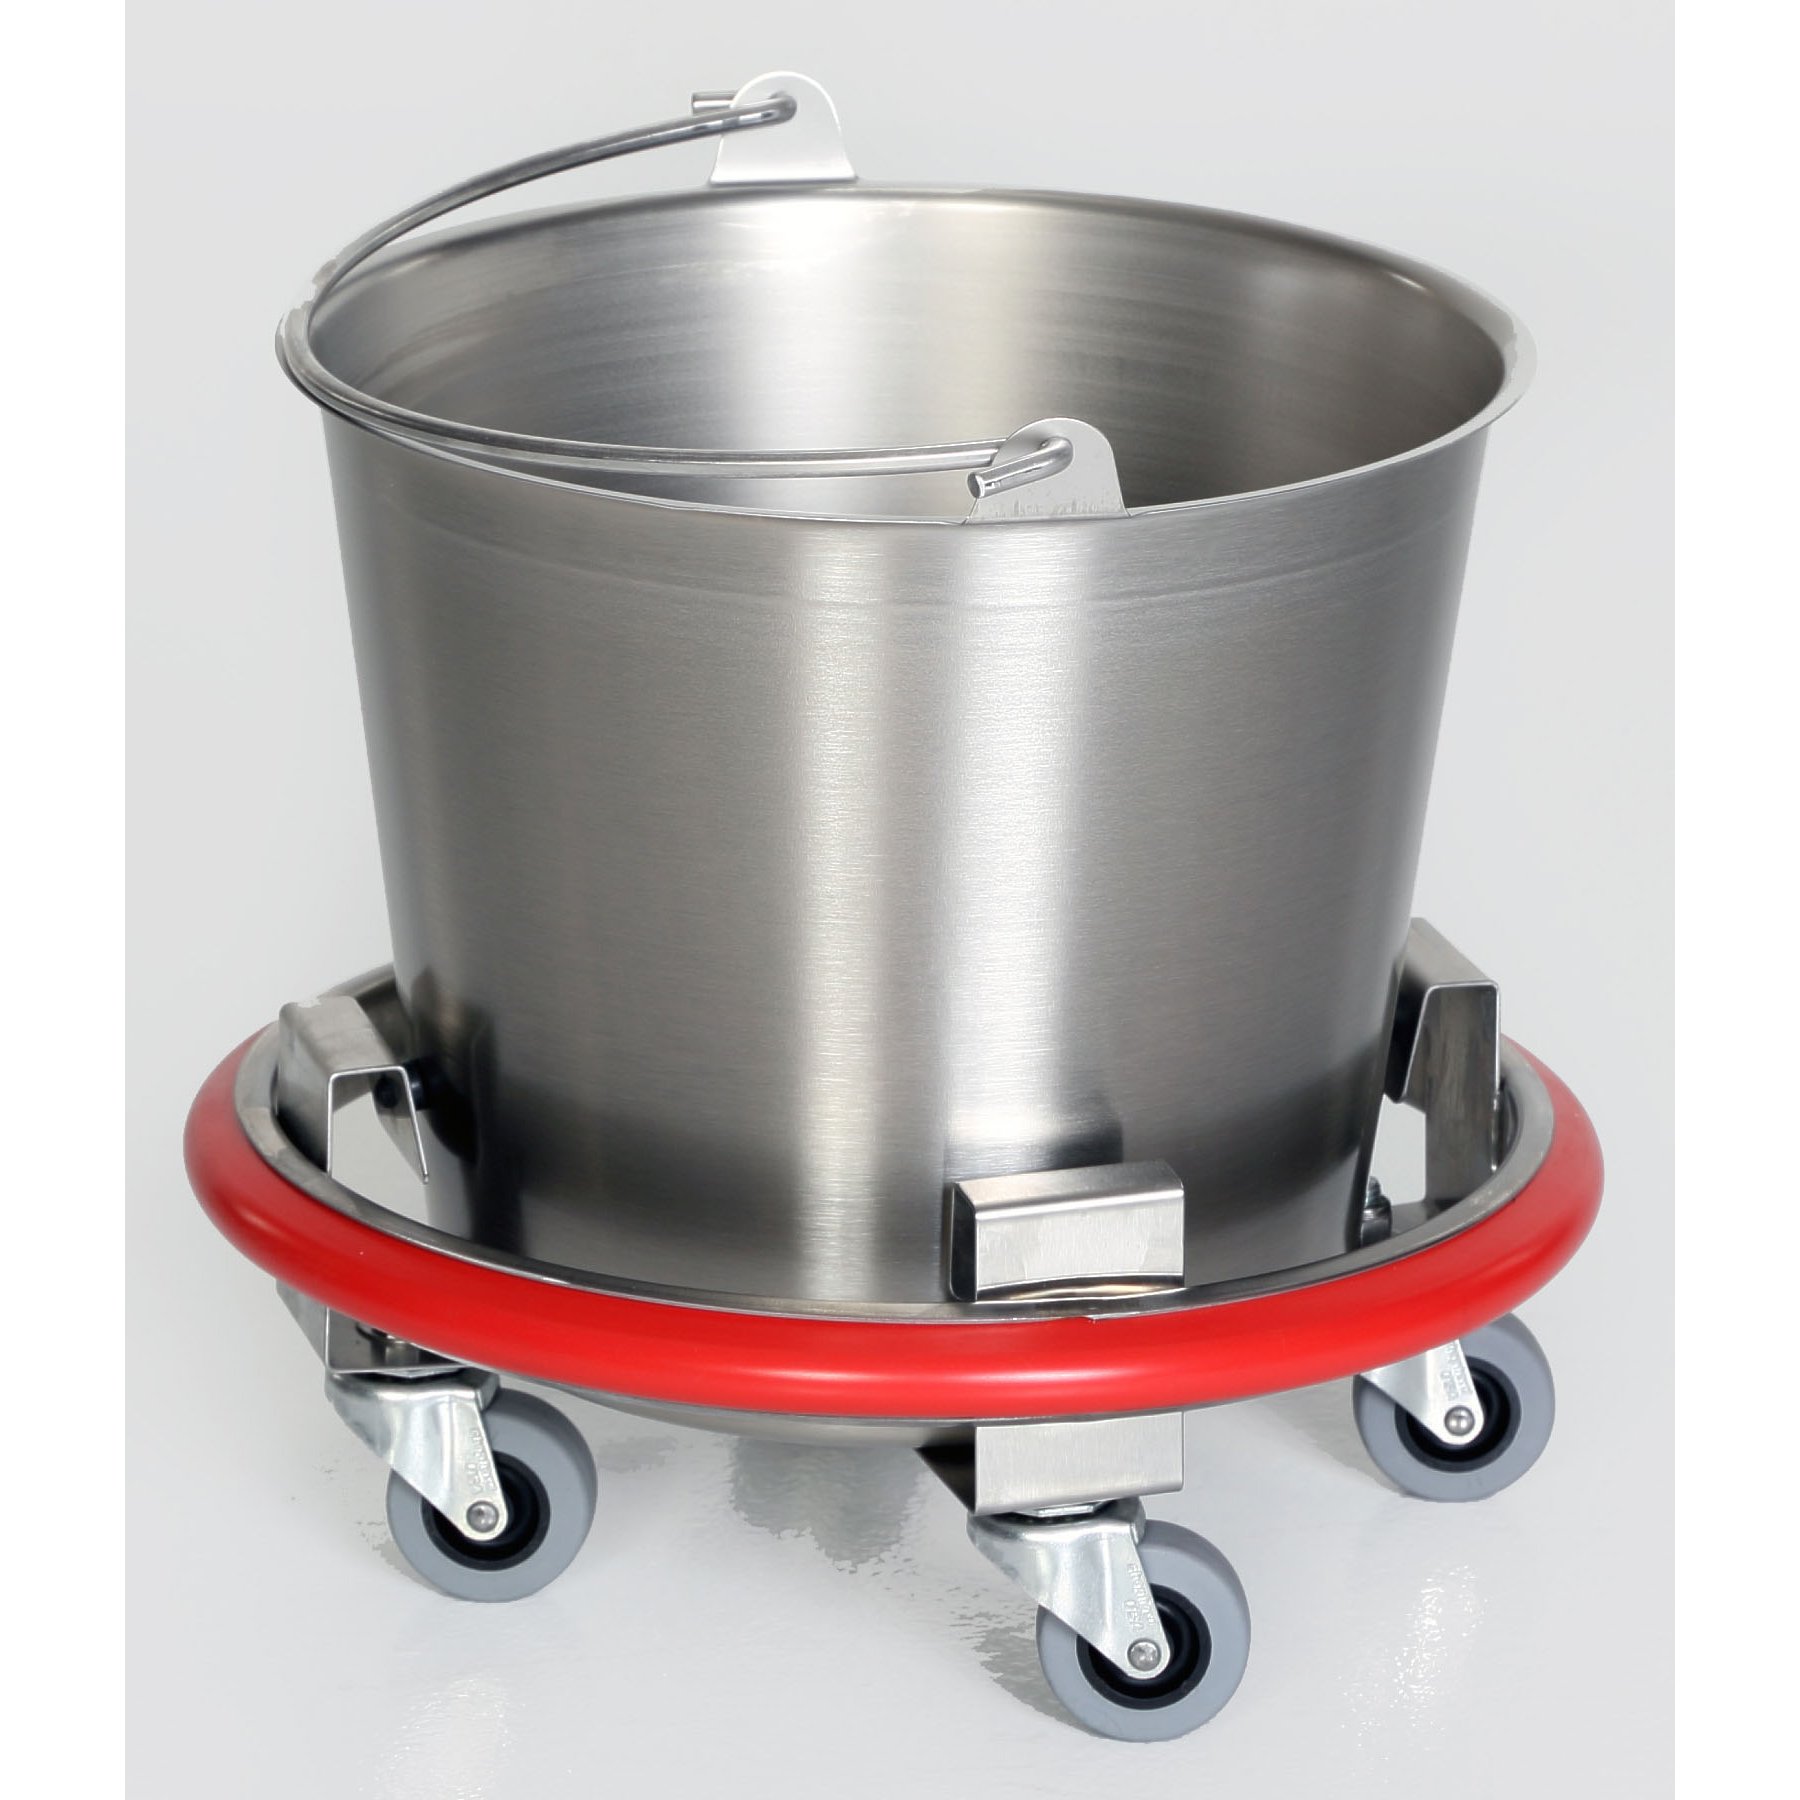  McKesson Kick Bucket with Wheels - Stainless Steel Bucket with  Bumper Frame, 13 qt, 1 Count : Health & Household